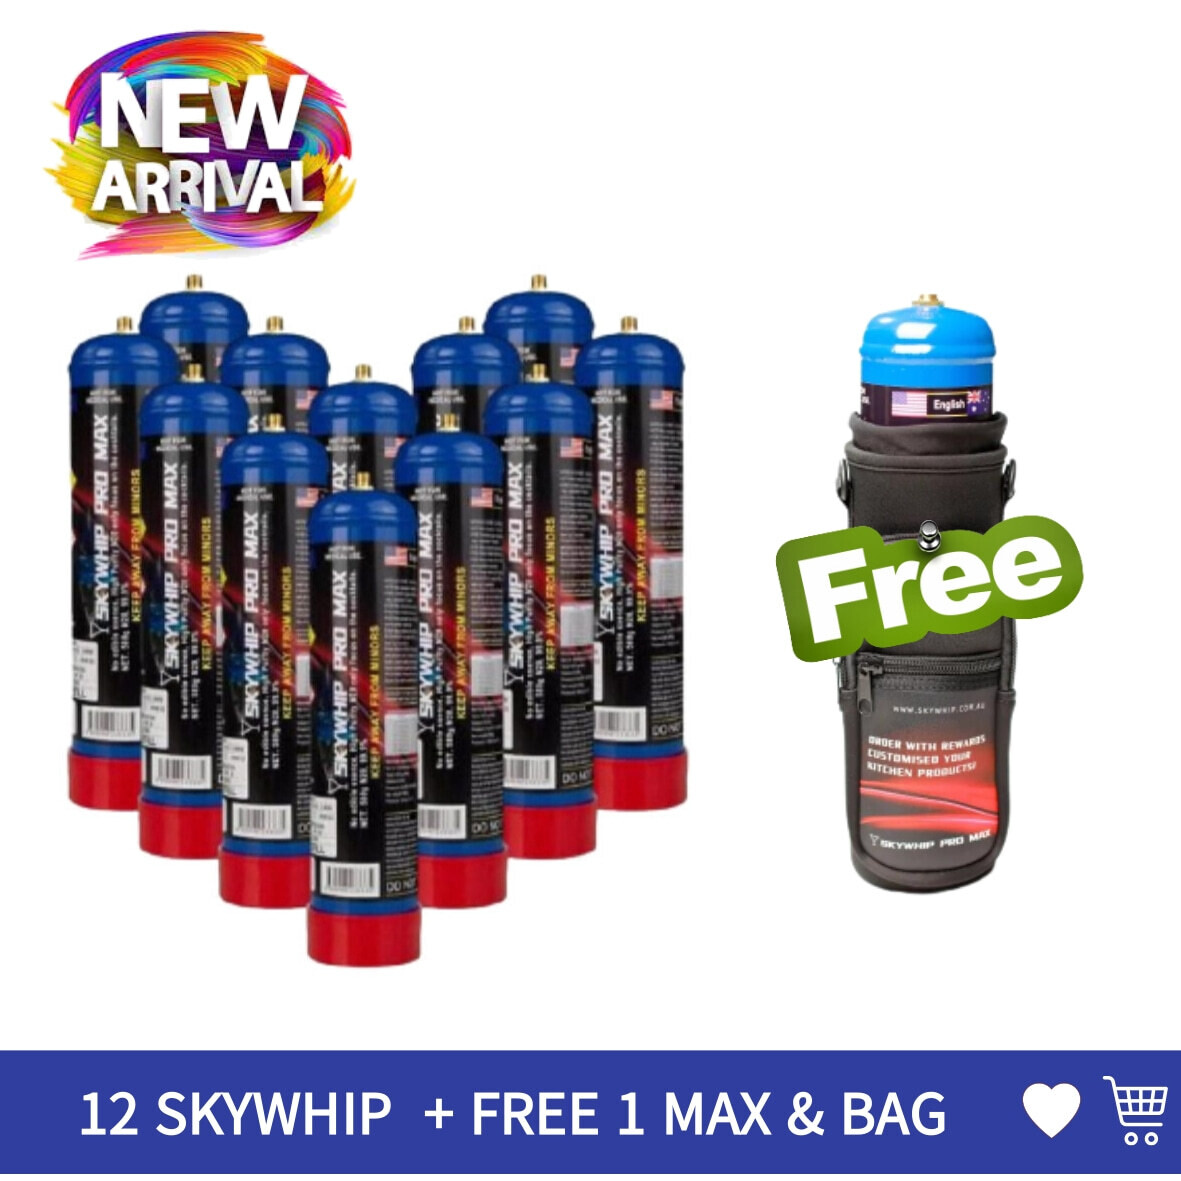 Cream Chargers: 12 x 580g Cylinder Skywhip Pro Max + Free Max & Bag